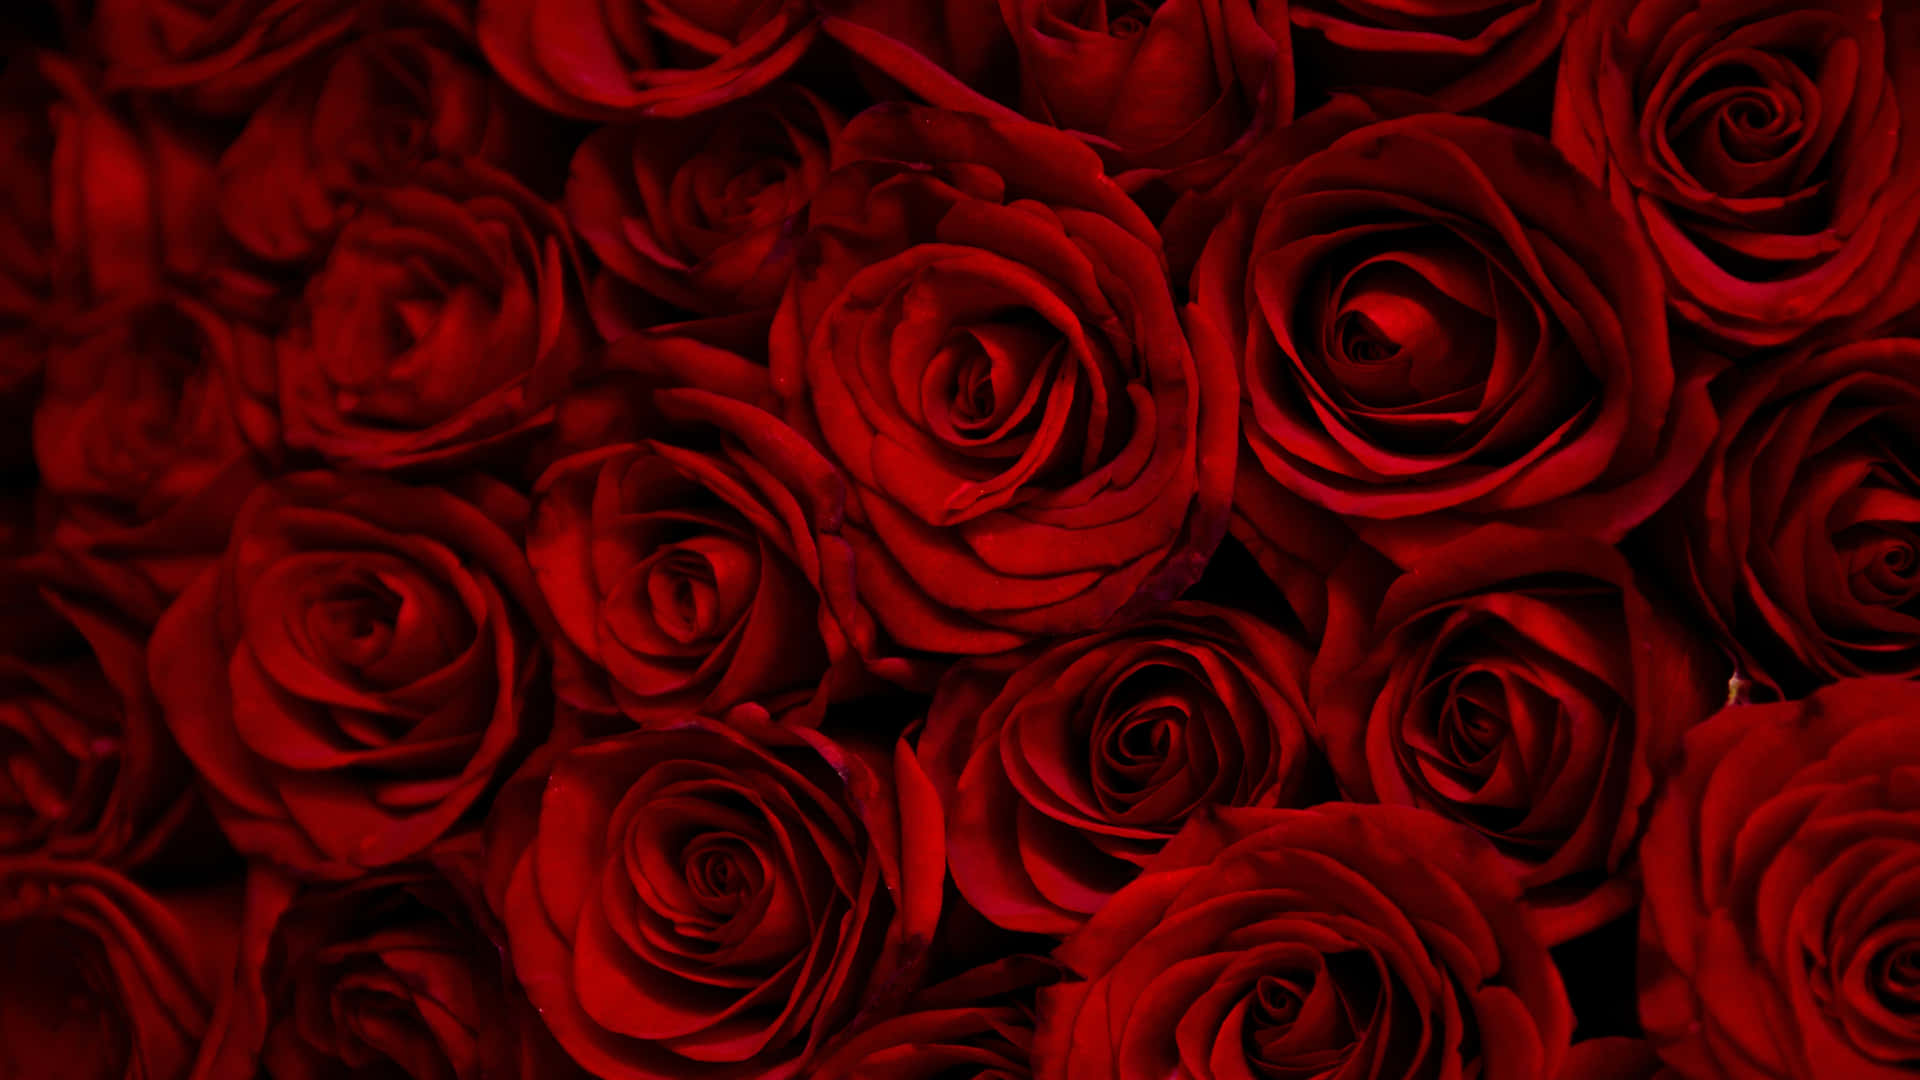 1440p Top View Shot Deep Red Roses Background